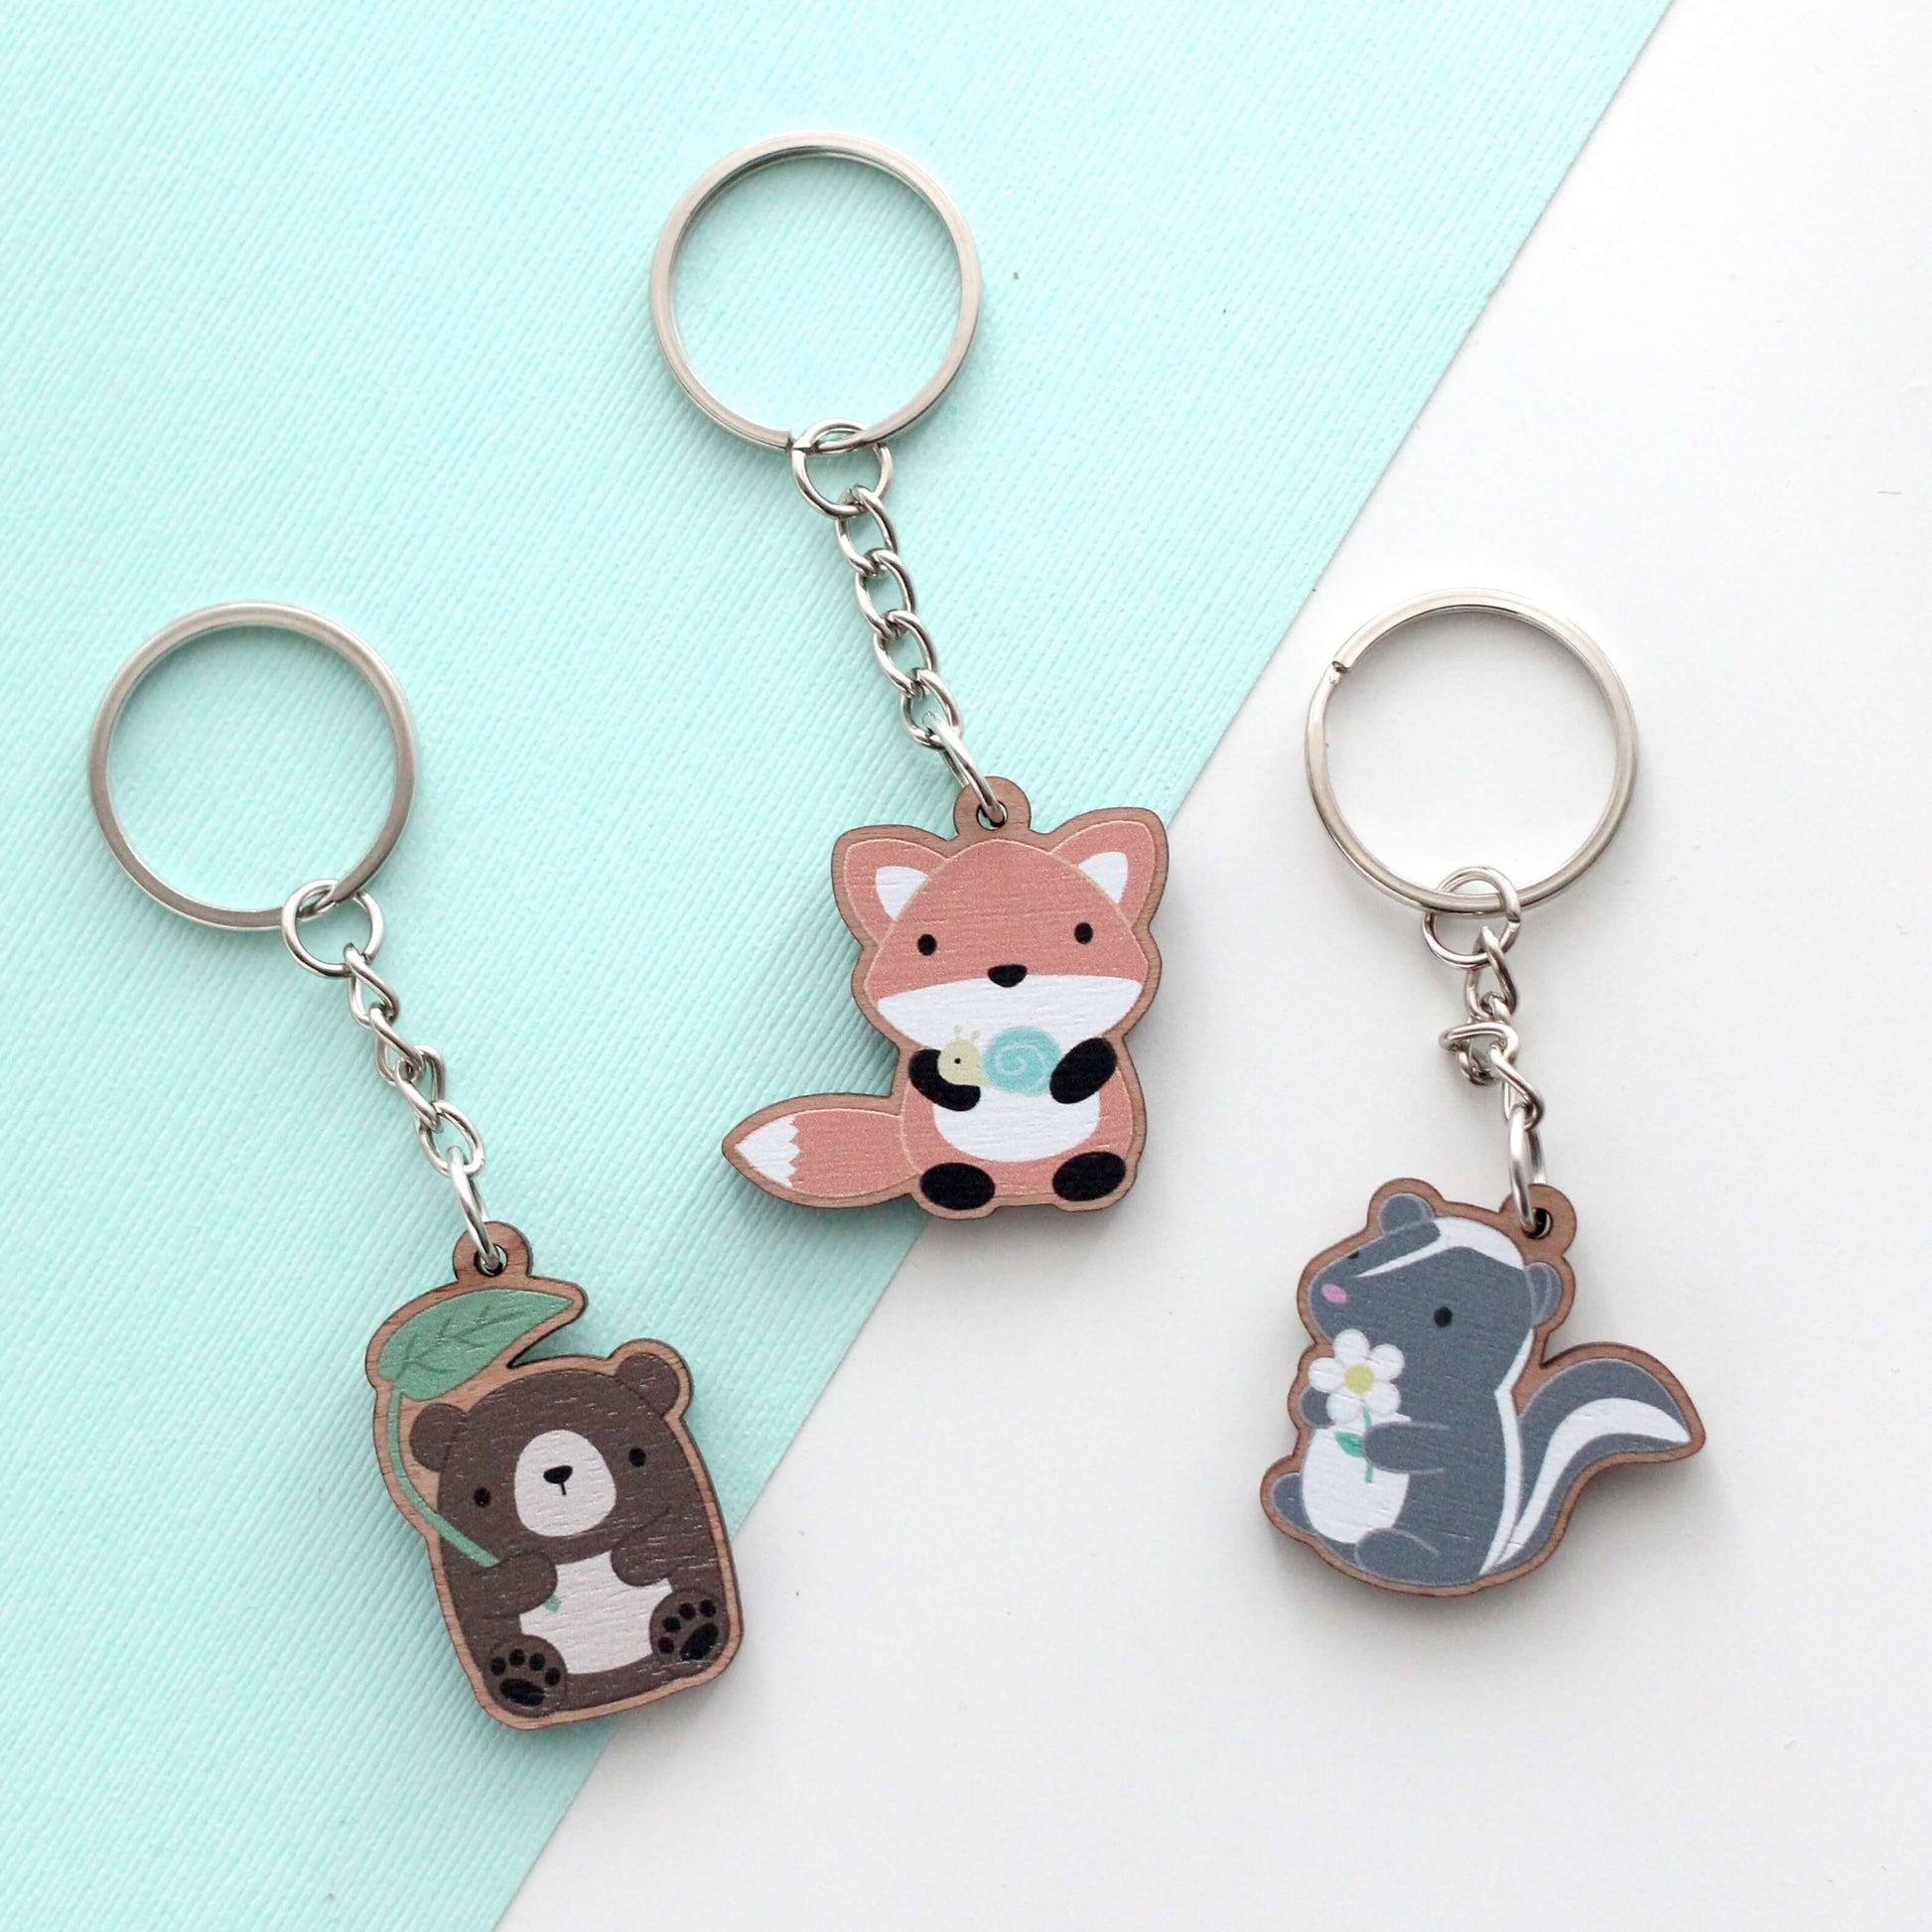 Fox w/ Snail Wooden Keychain - Cute Wood Charm - Eco-Friendly Gift by Wild Whimsy Woolies